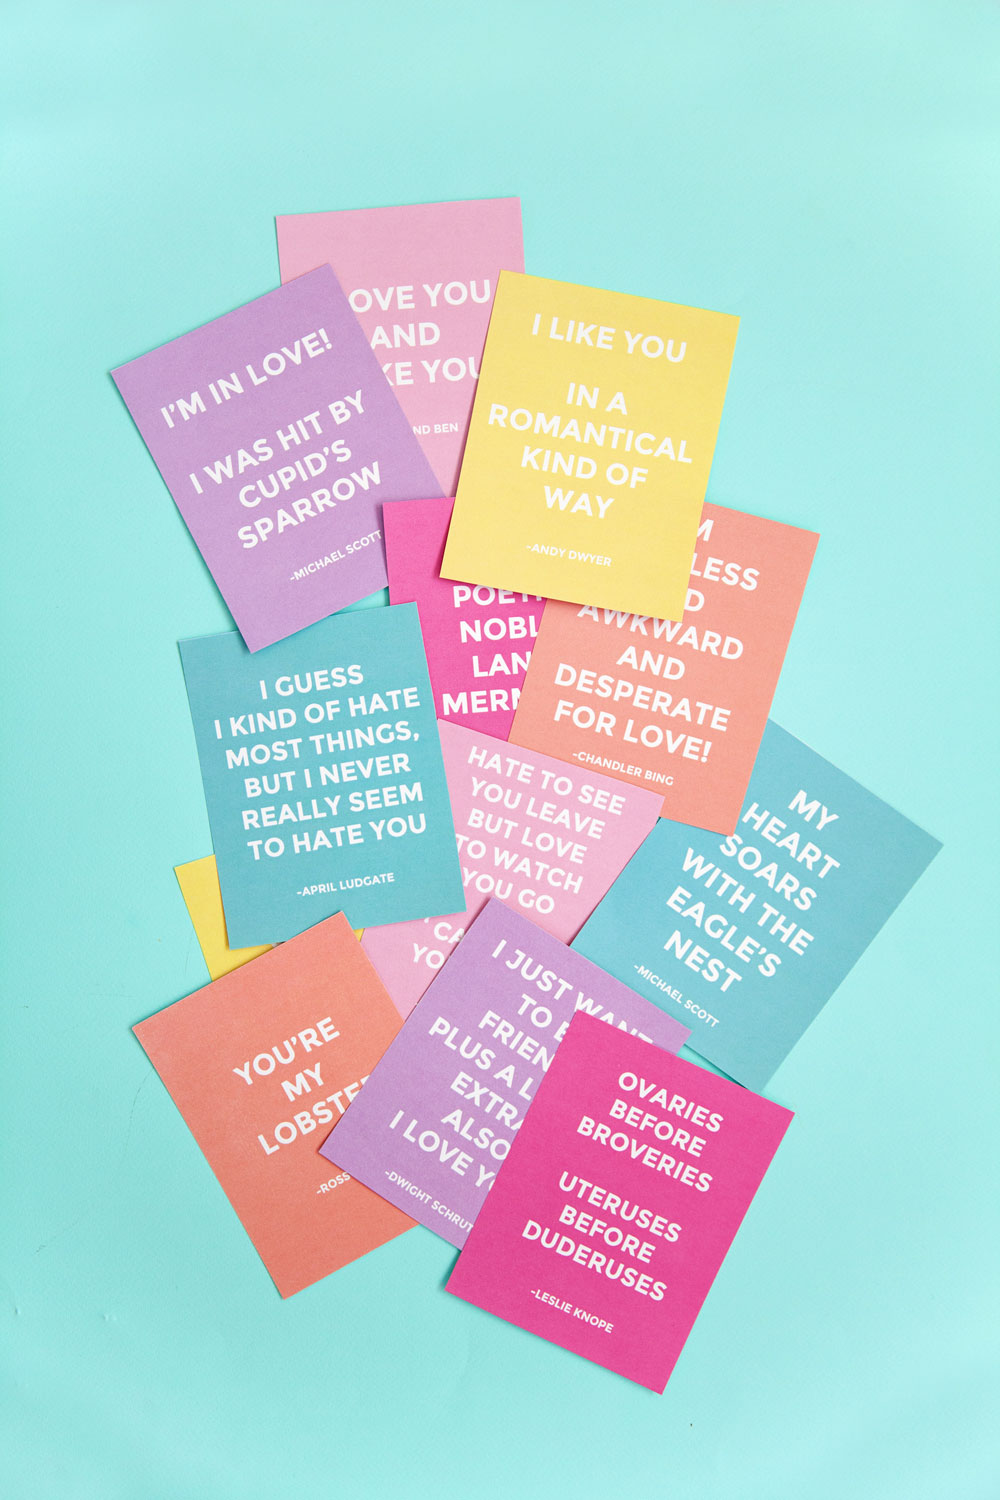 These funny quote Valentine's are sure to get some laughs. All quotes from The Office, Parks and Rec and Friends... some of the best shows ever!